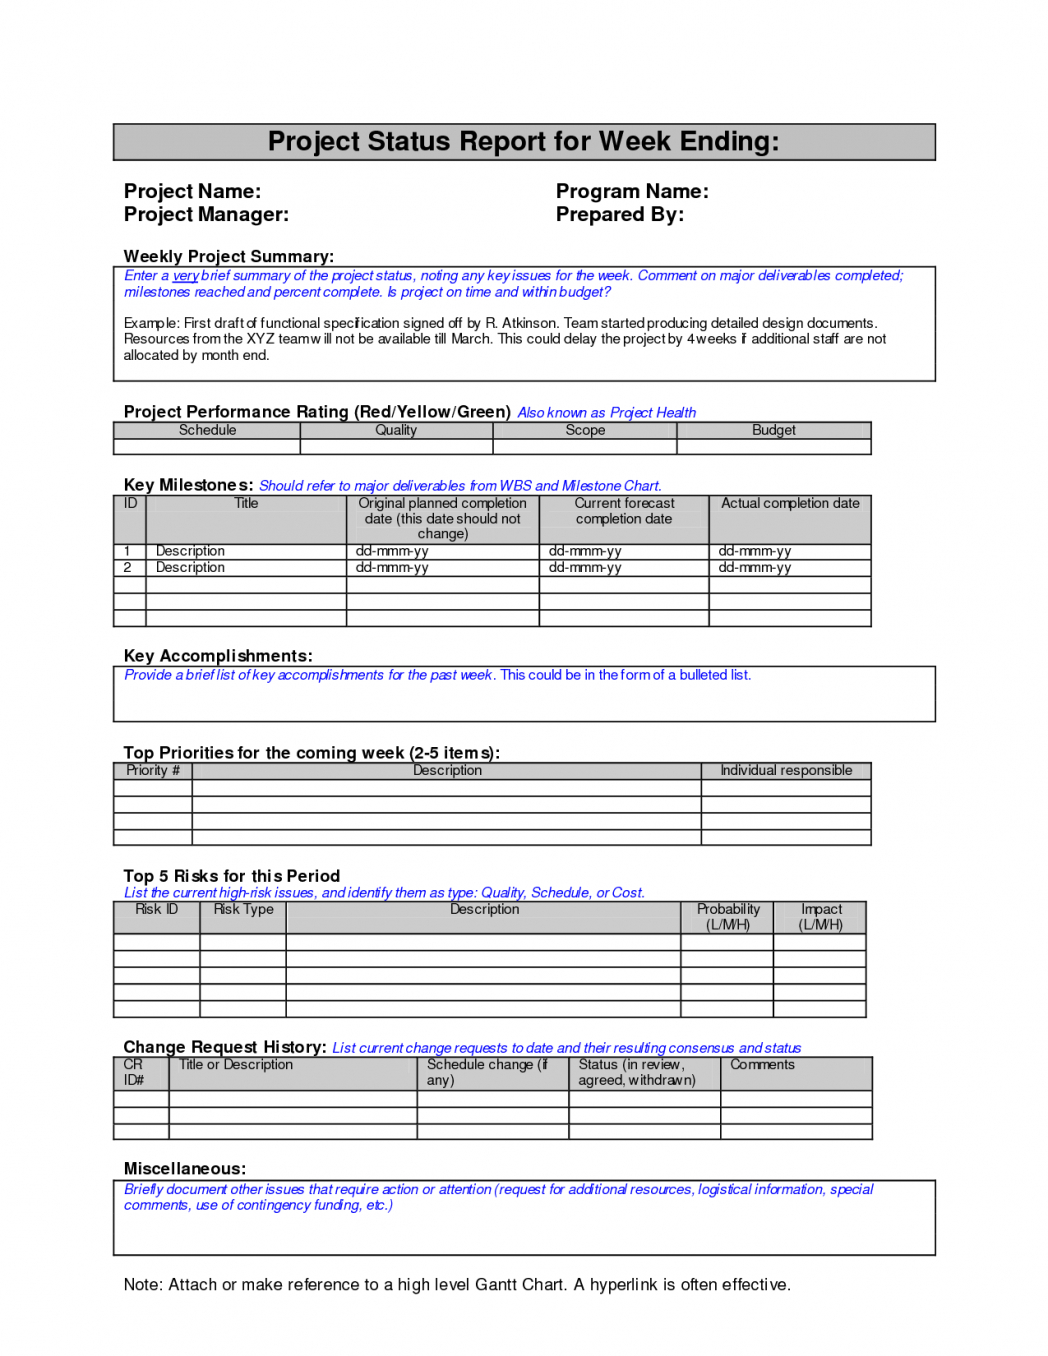 Project Management Report Template Audit Example Weekly Status Ppt with Weekly Progress Report Template Project Management